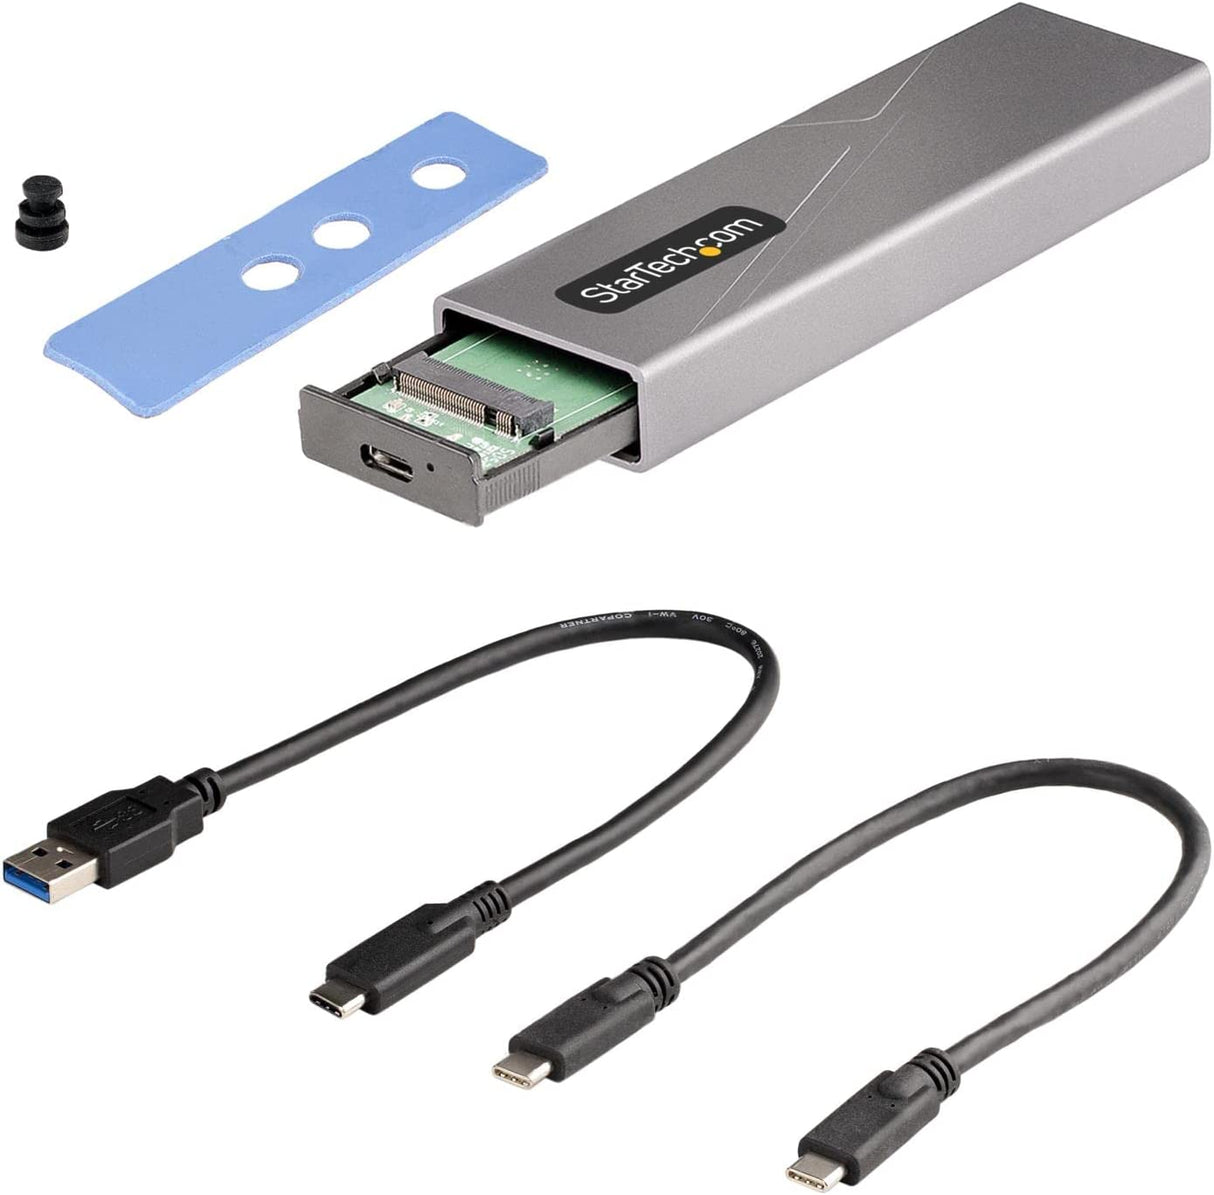 USB-C 10Gbps to M.2 NVMe or M.2 SATA SSD Enclosure - Tool-free External M.2  PCIe/SATA NGFF SSD Aluminum Case - USB Type-C&A Host Cables - Supports